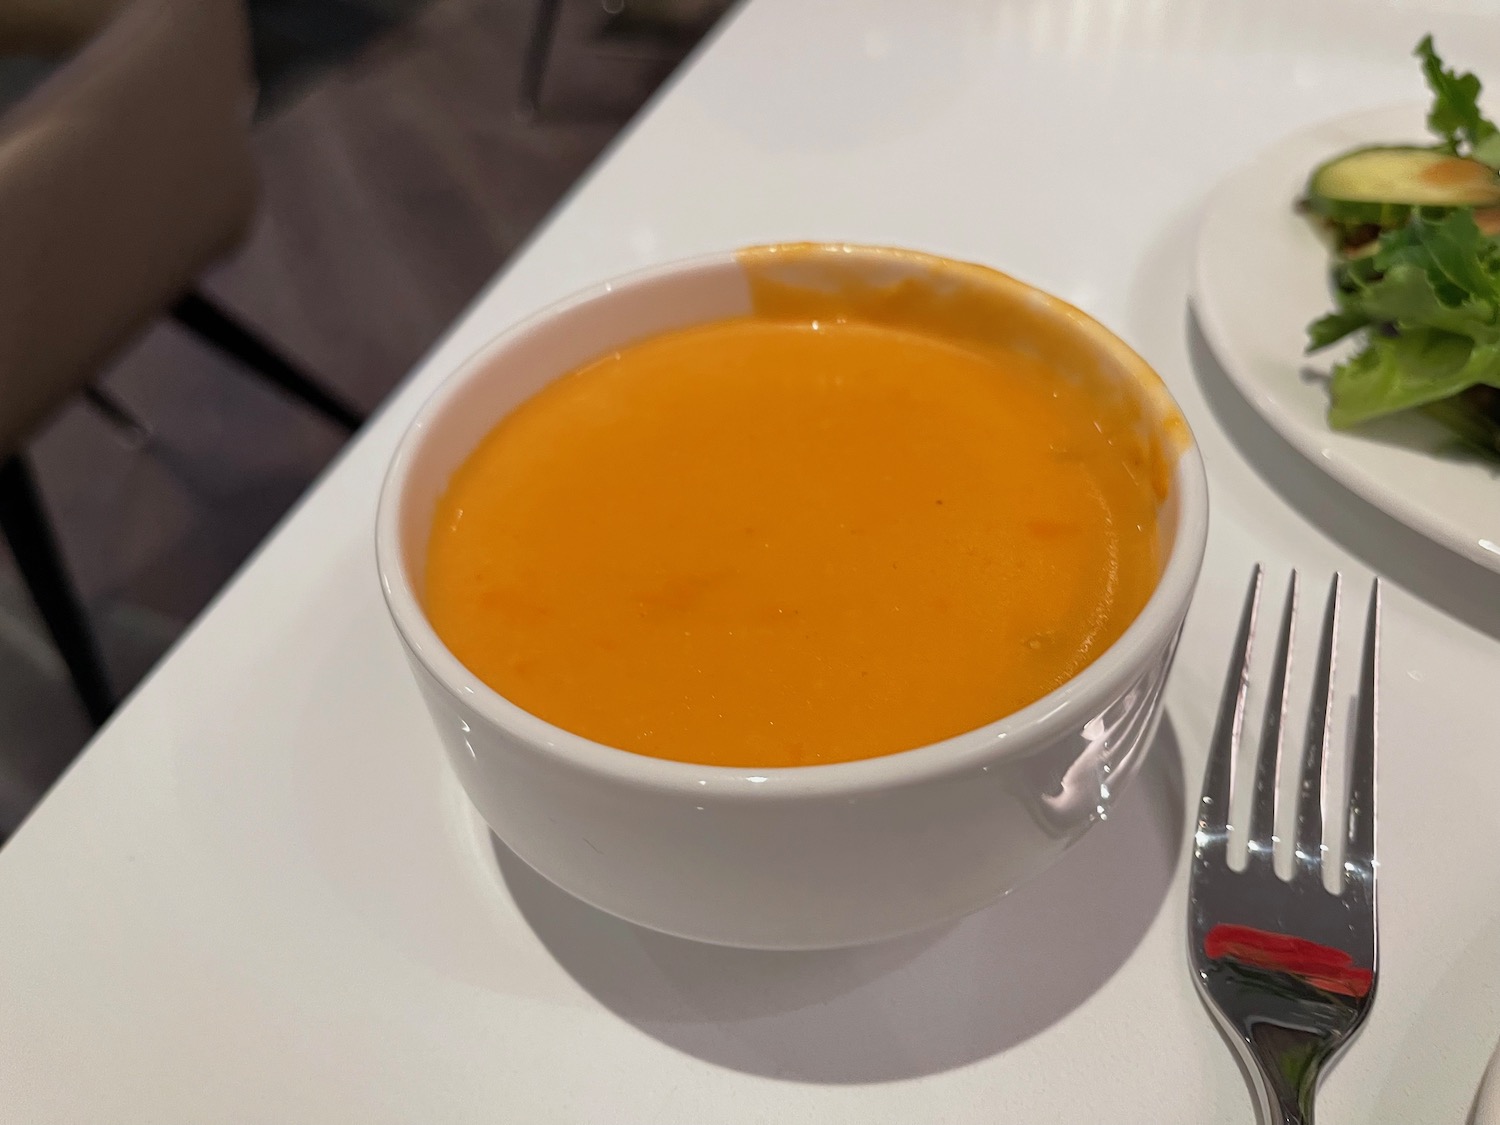 a bowl of soup on a table